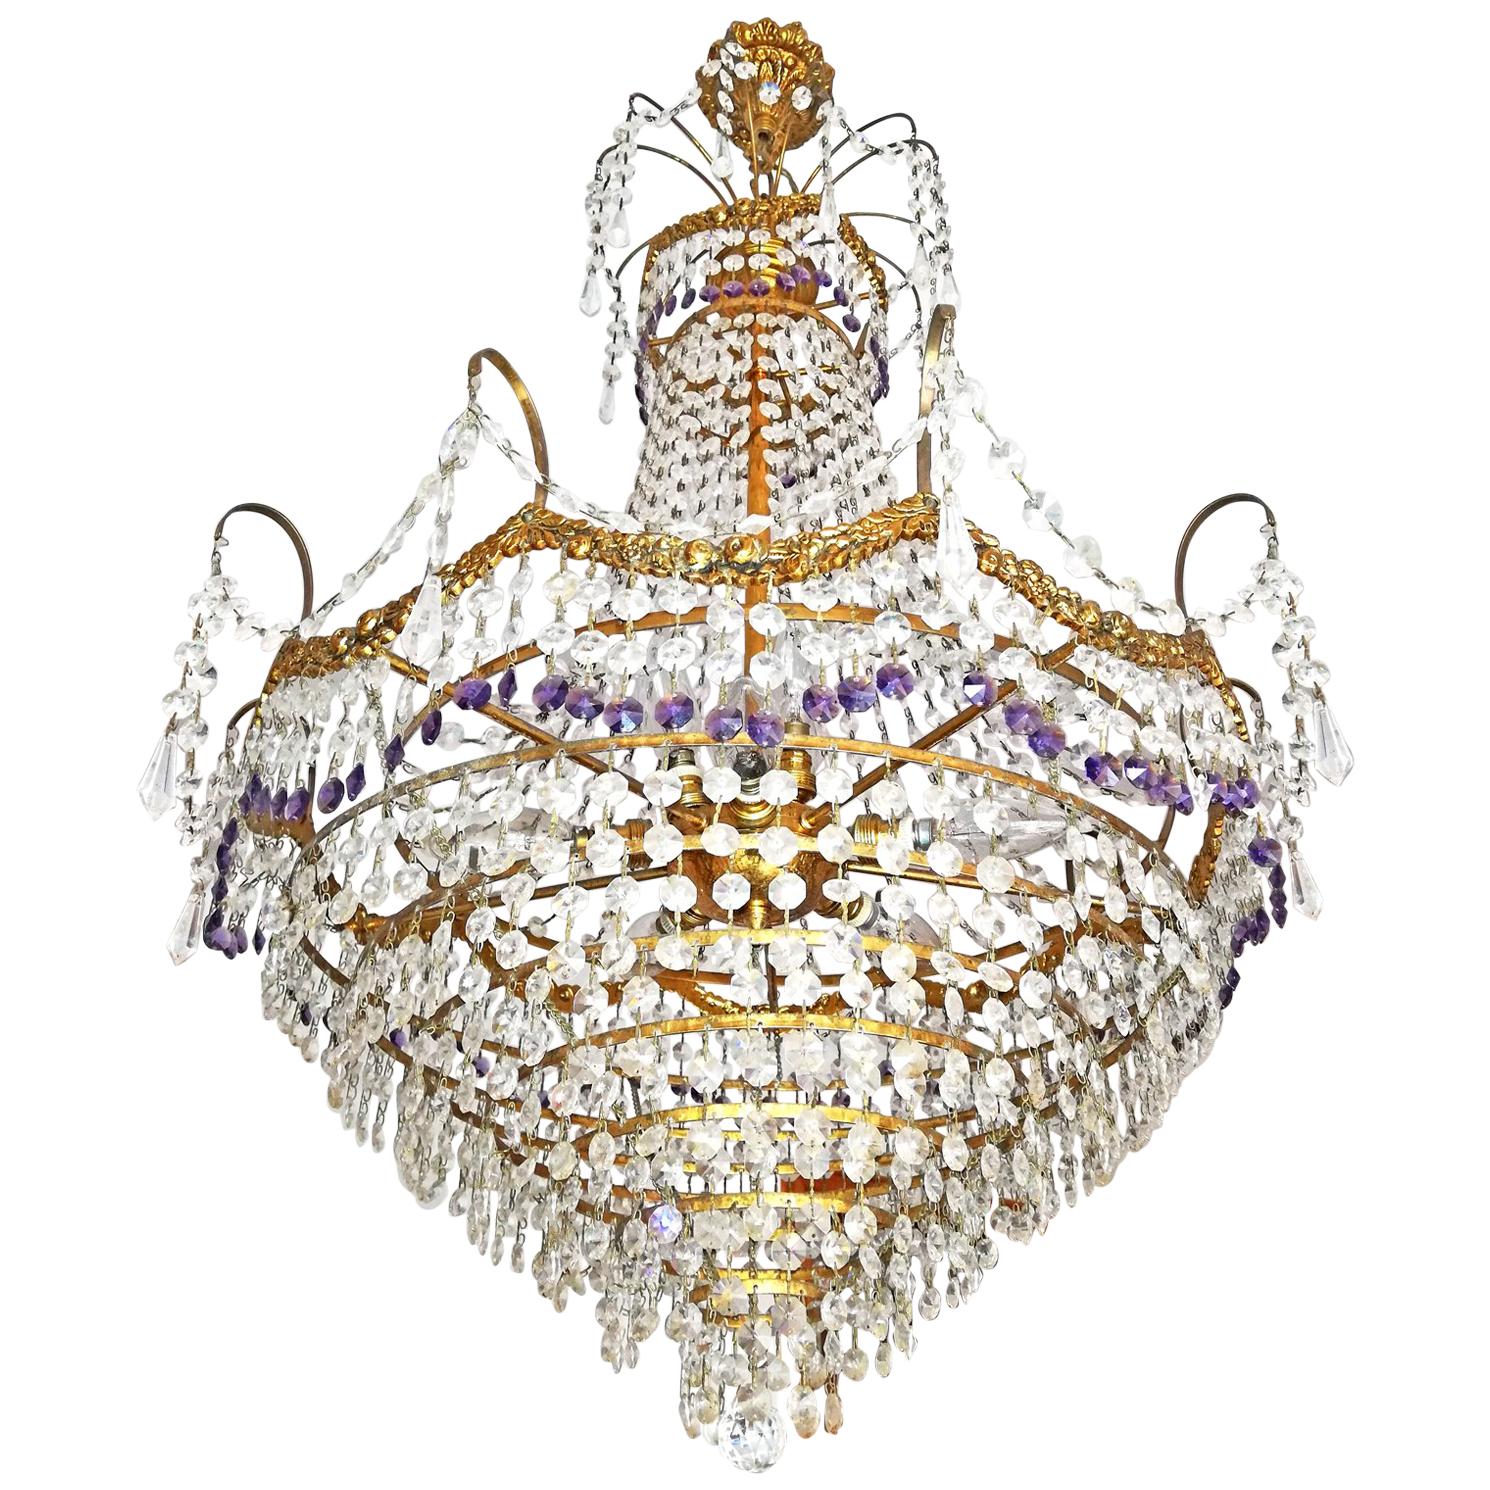 Stunning French Hollywood Regency Empire amethyst cut crystal and bronze 8-light chandelier with crystal drops and swags
Measures: 
Diameter: 24.5 in/ 62 cm
Height: 40 in / 100 cm
Weight: 22 lb/10 Kg
Eight light bulbs E14/ good working